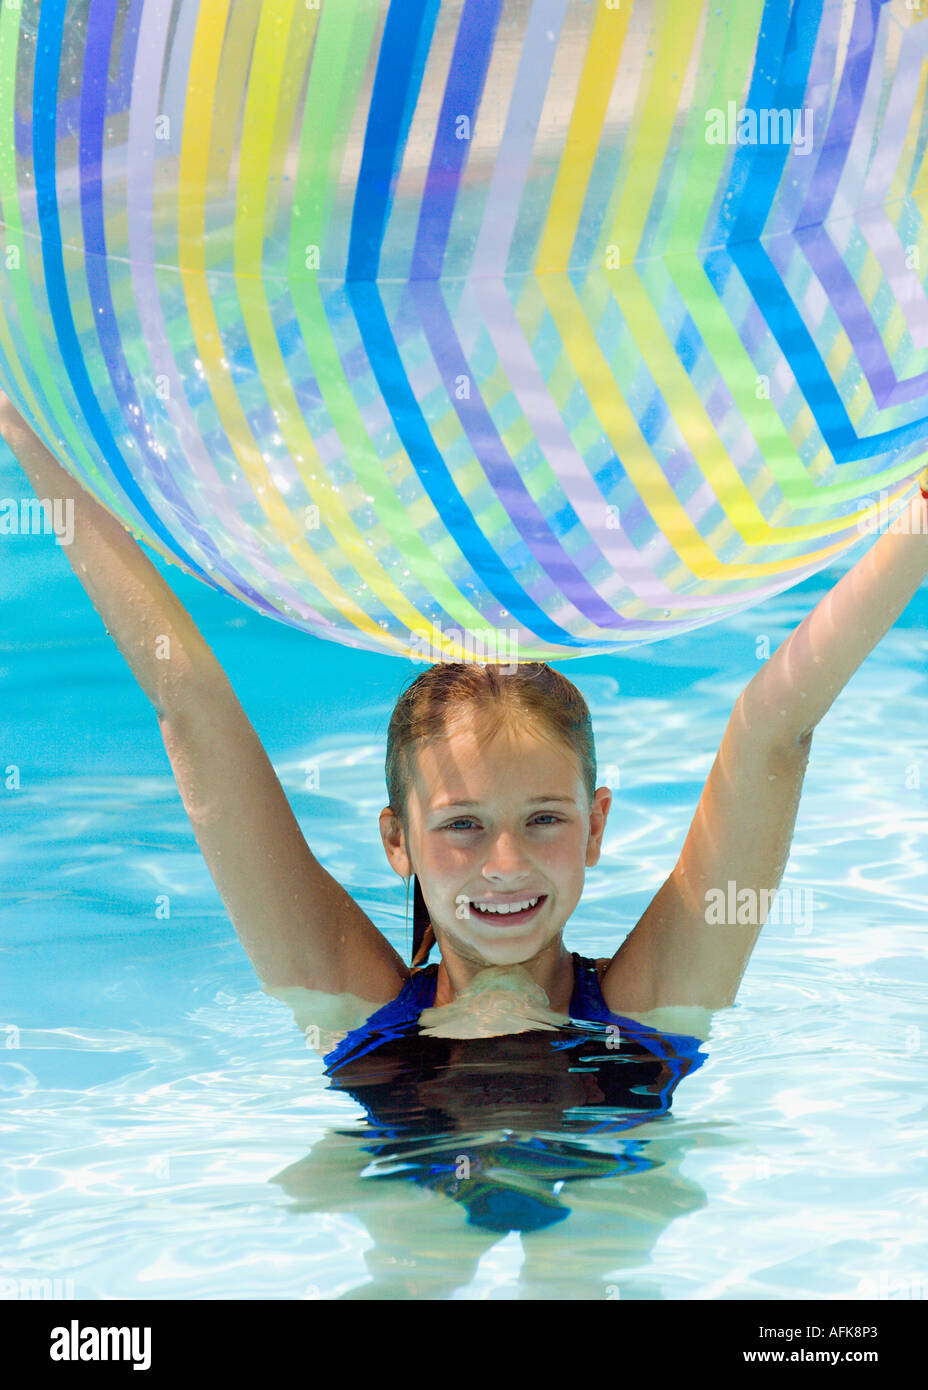 Girl holding beach ball over head in swimming pool Stock Photo